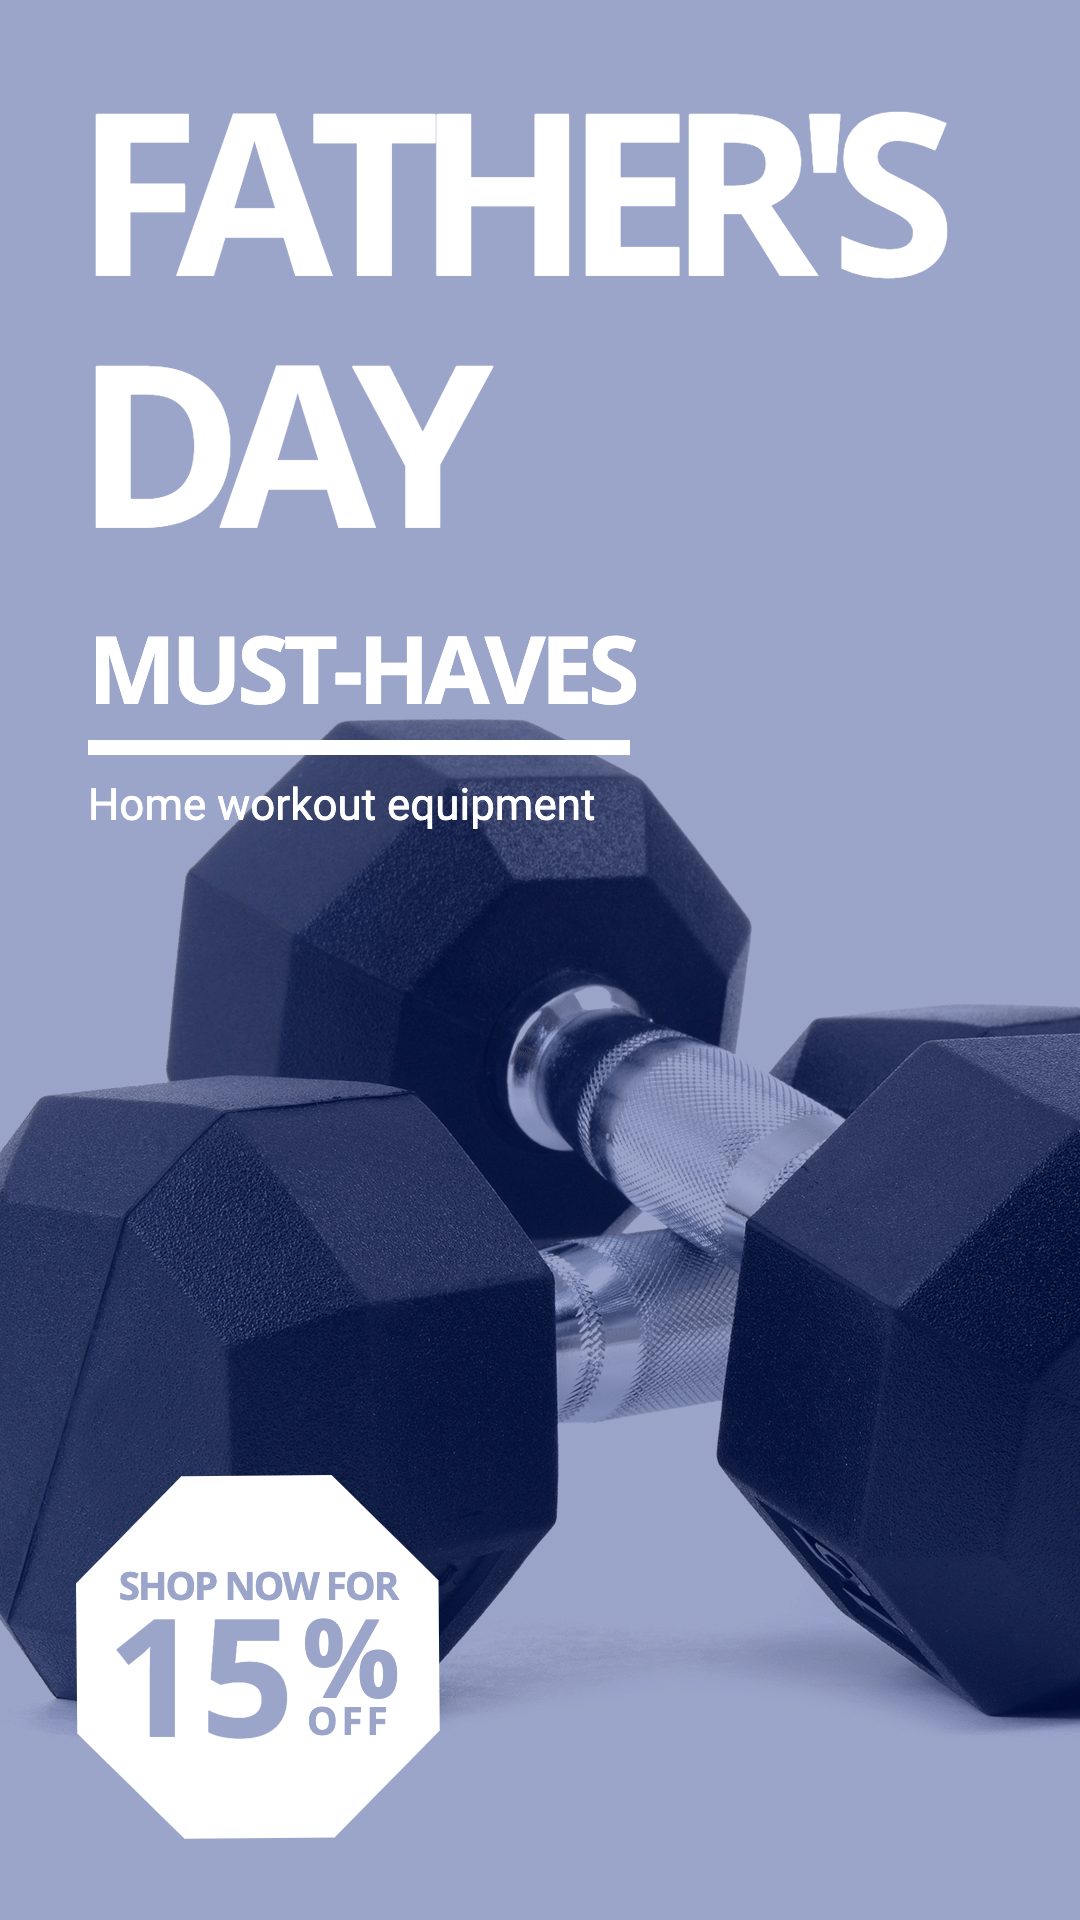 Typesetting Father's Day Workout Equipment Promotion Ecommerce Story预览效果